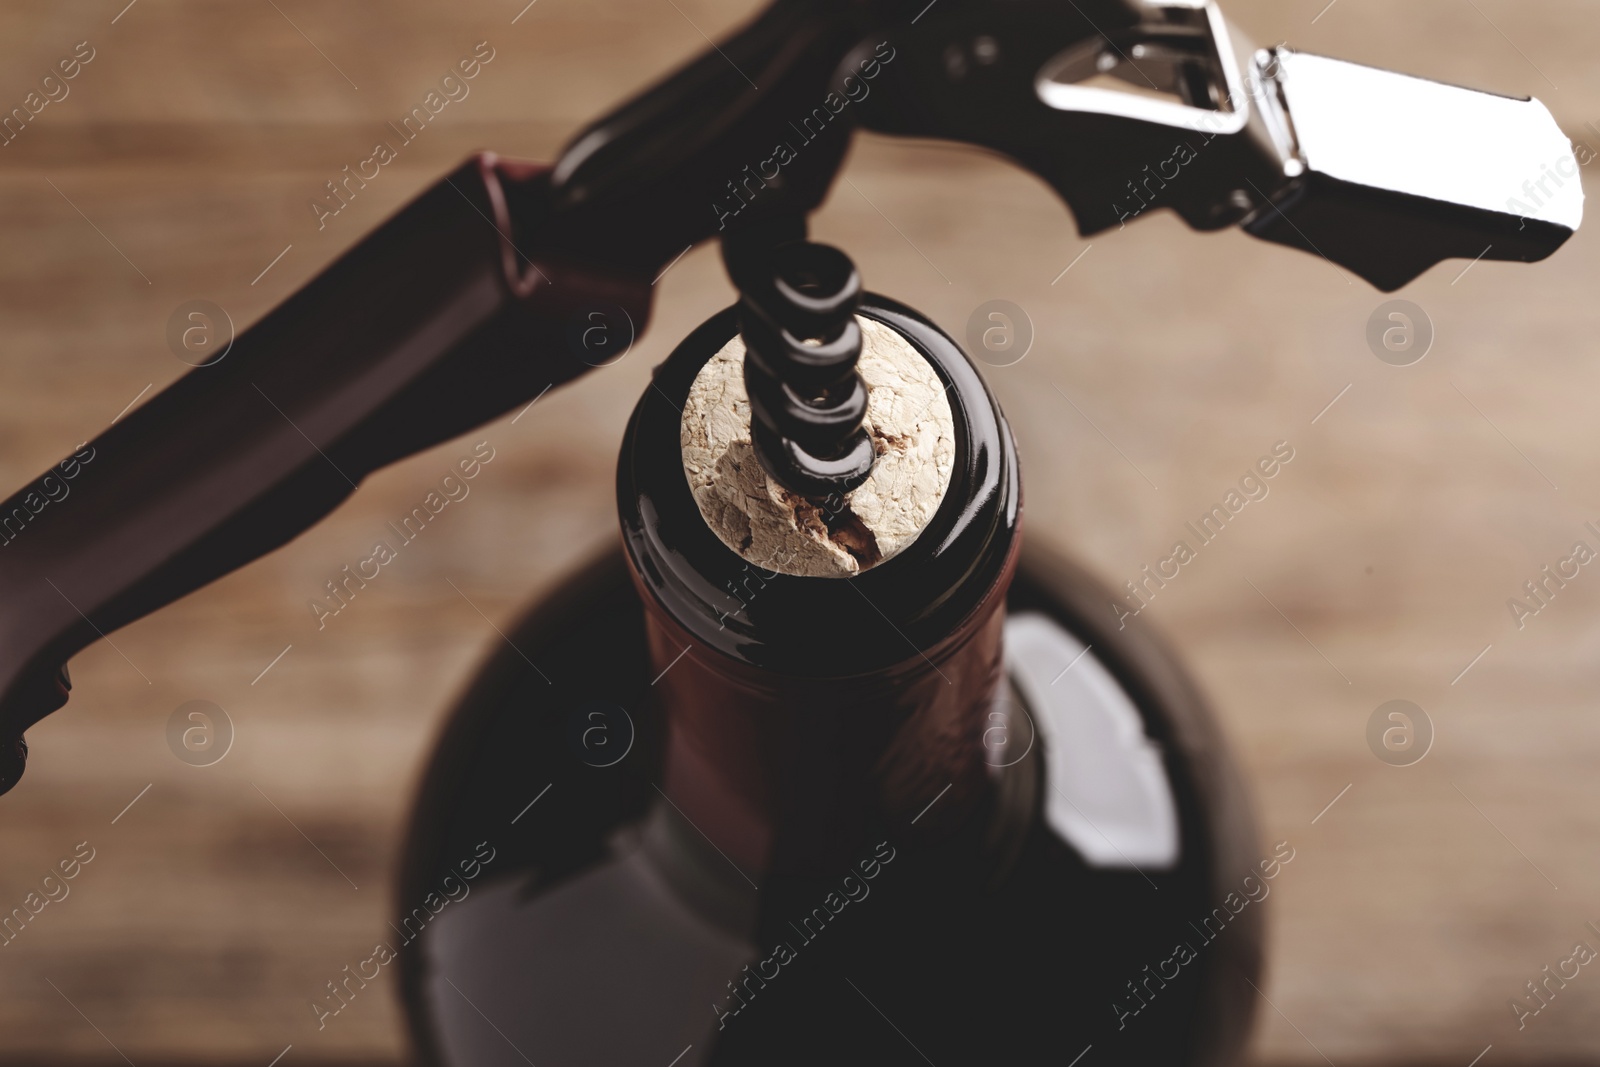 Image of Opening wine bottle with corkscrew on blurred background, closeup